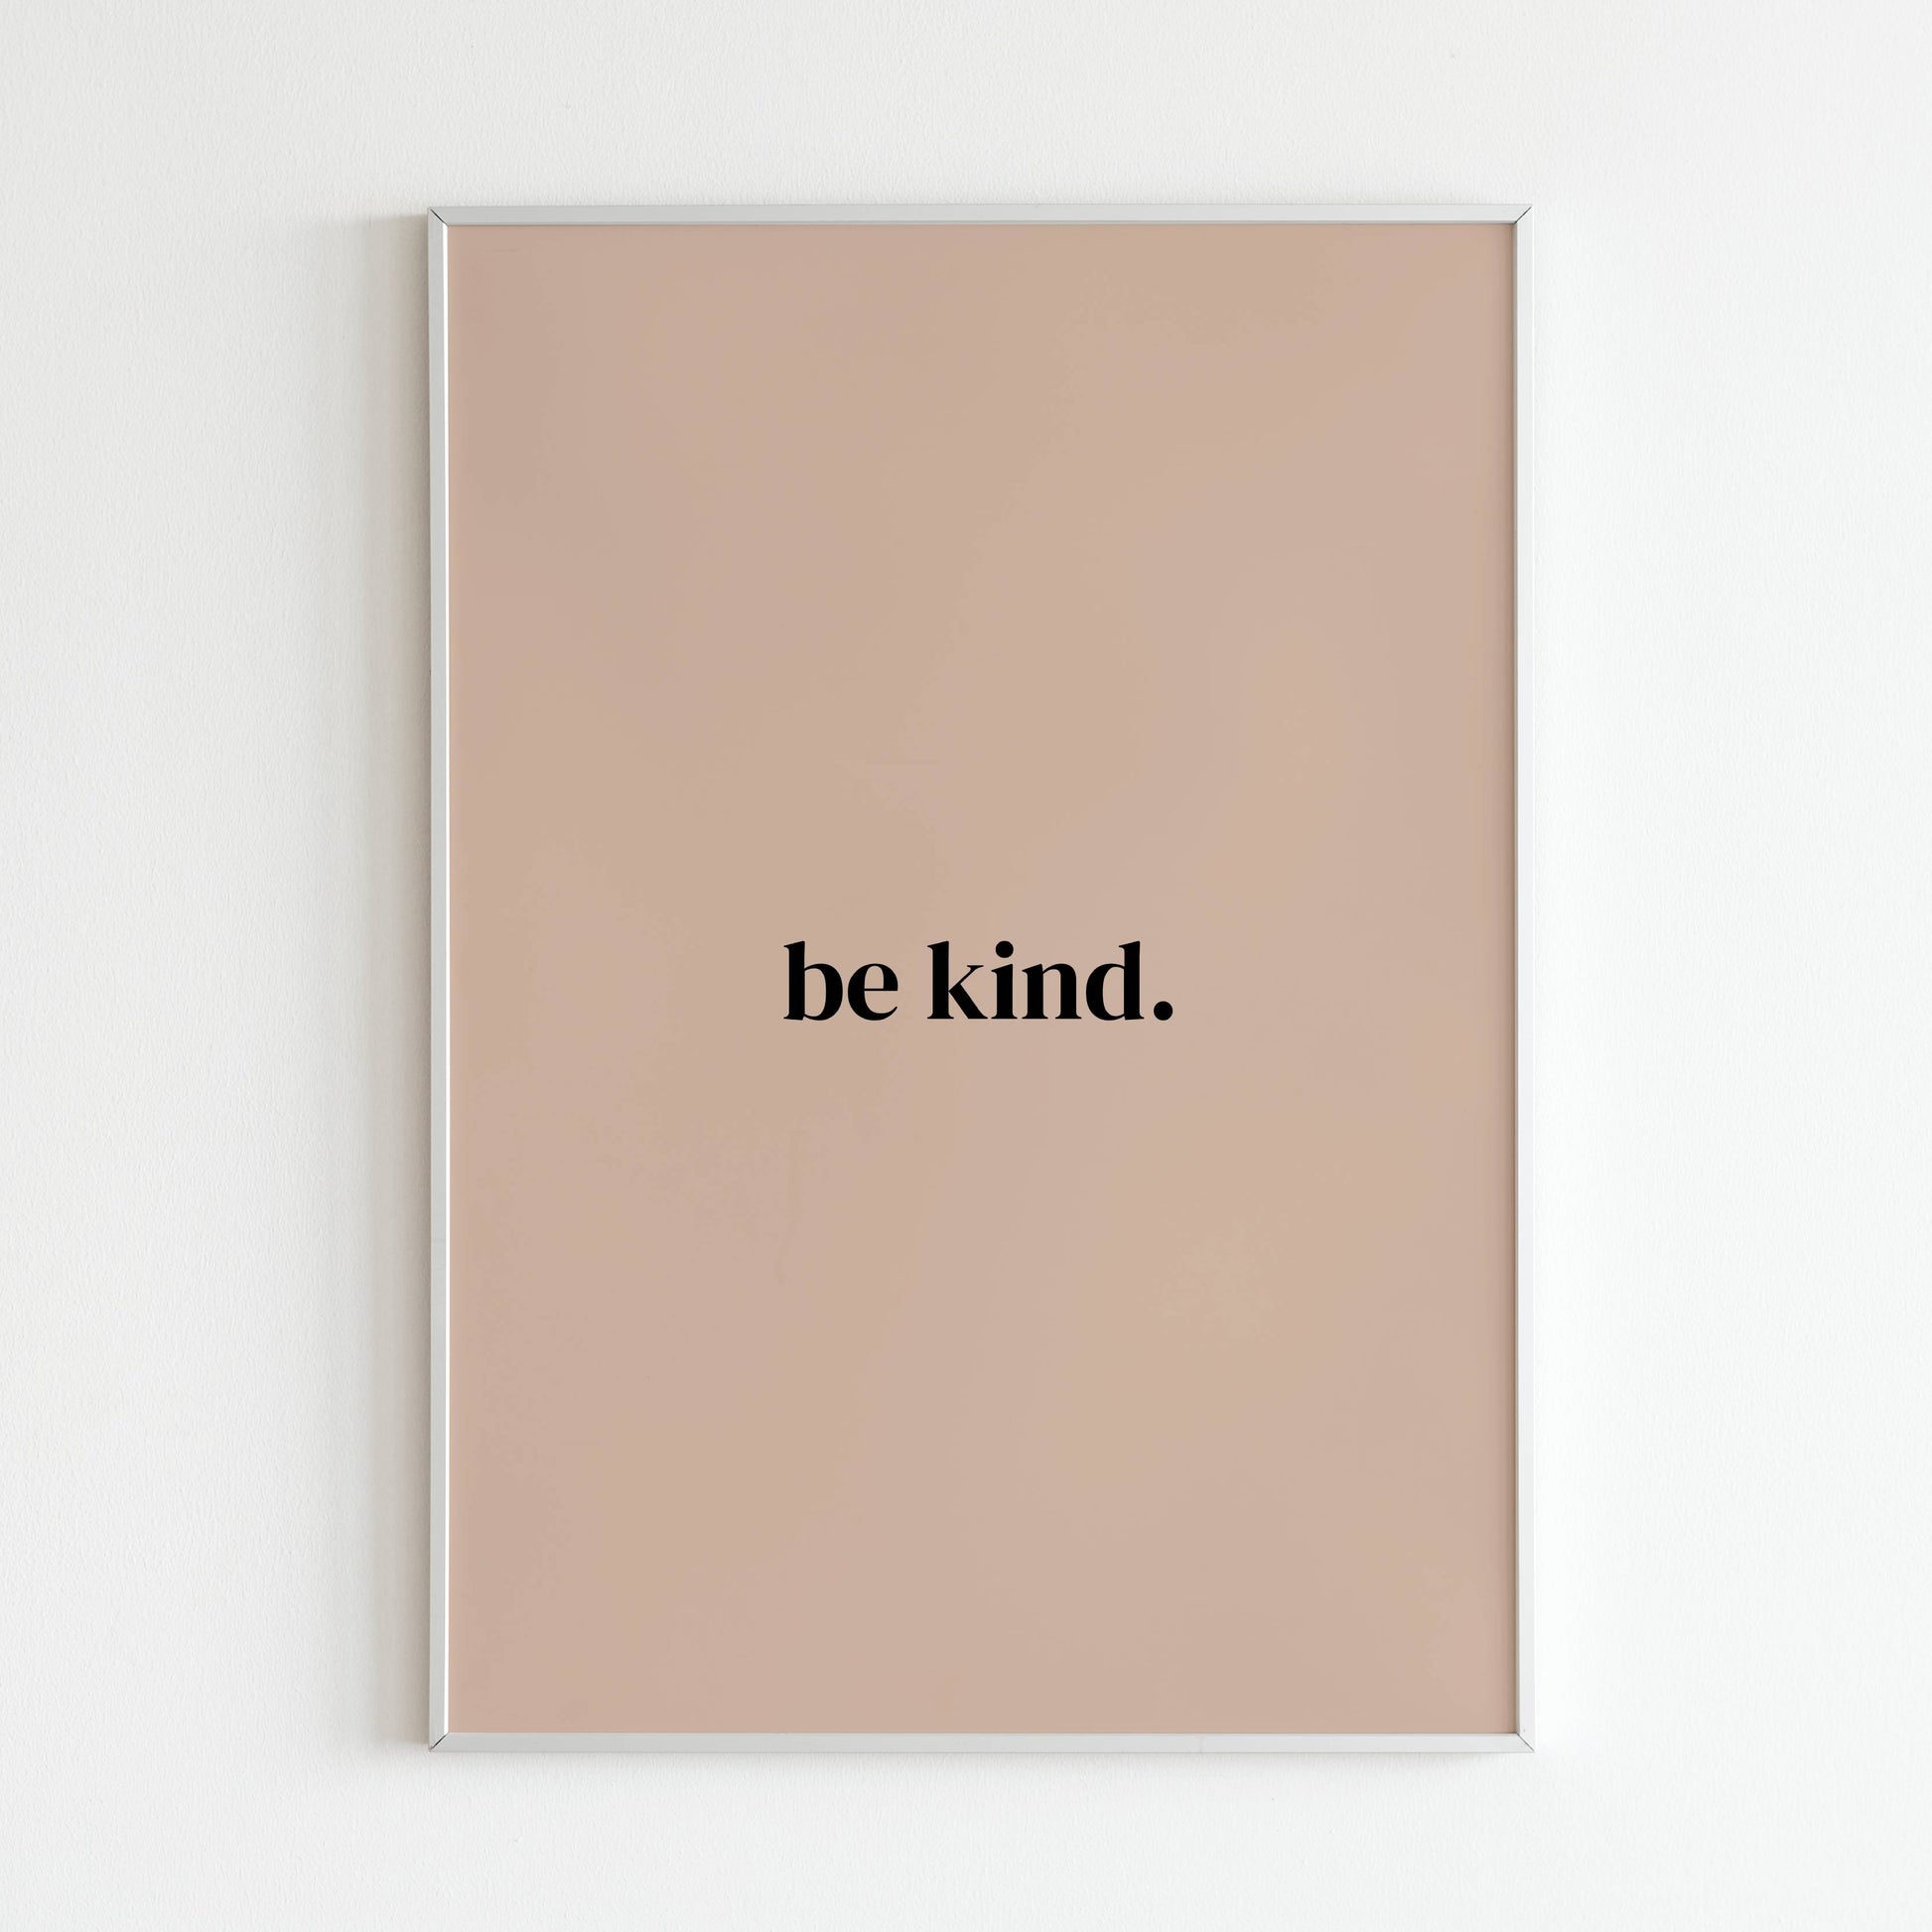 Downloadable "Be kind" art print, inspire yourself and others with a message of kindness.